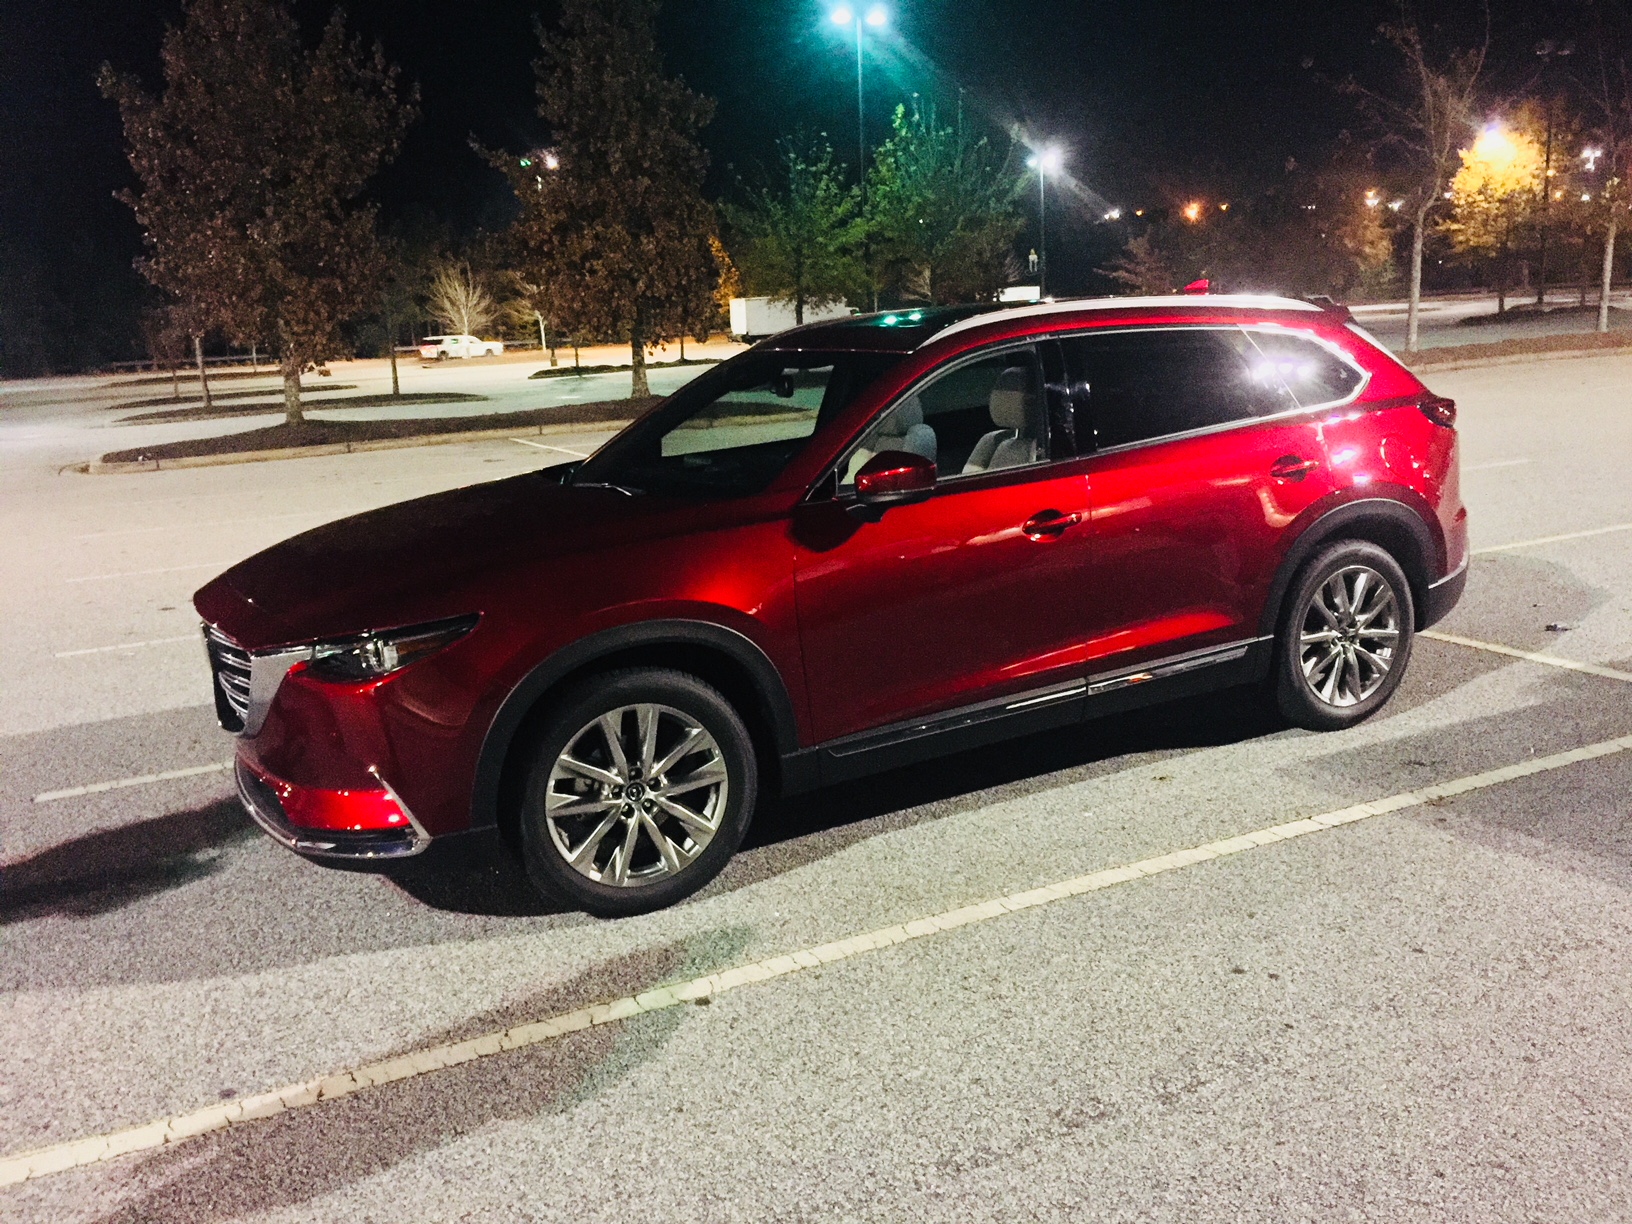 Black Friday Shopping with the 2018 Mazda CX9